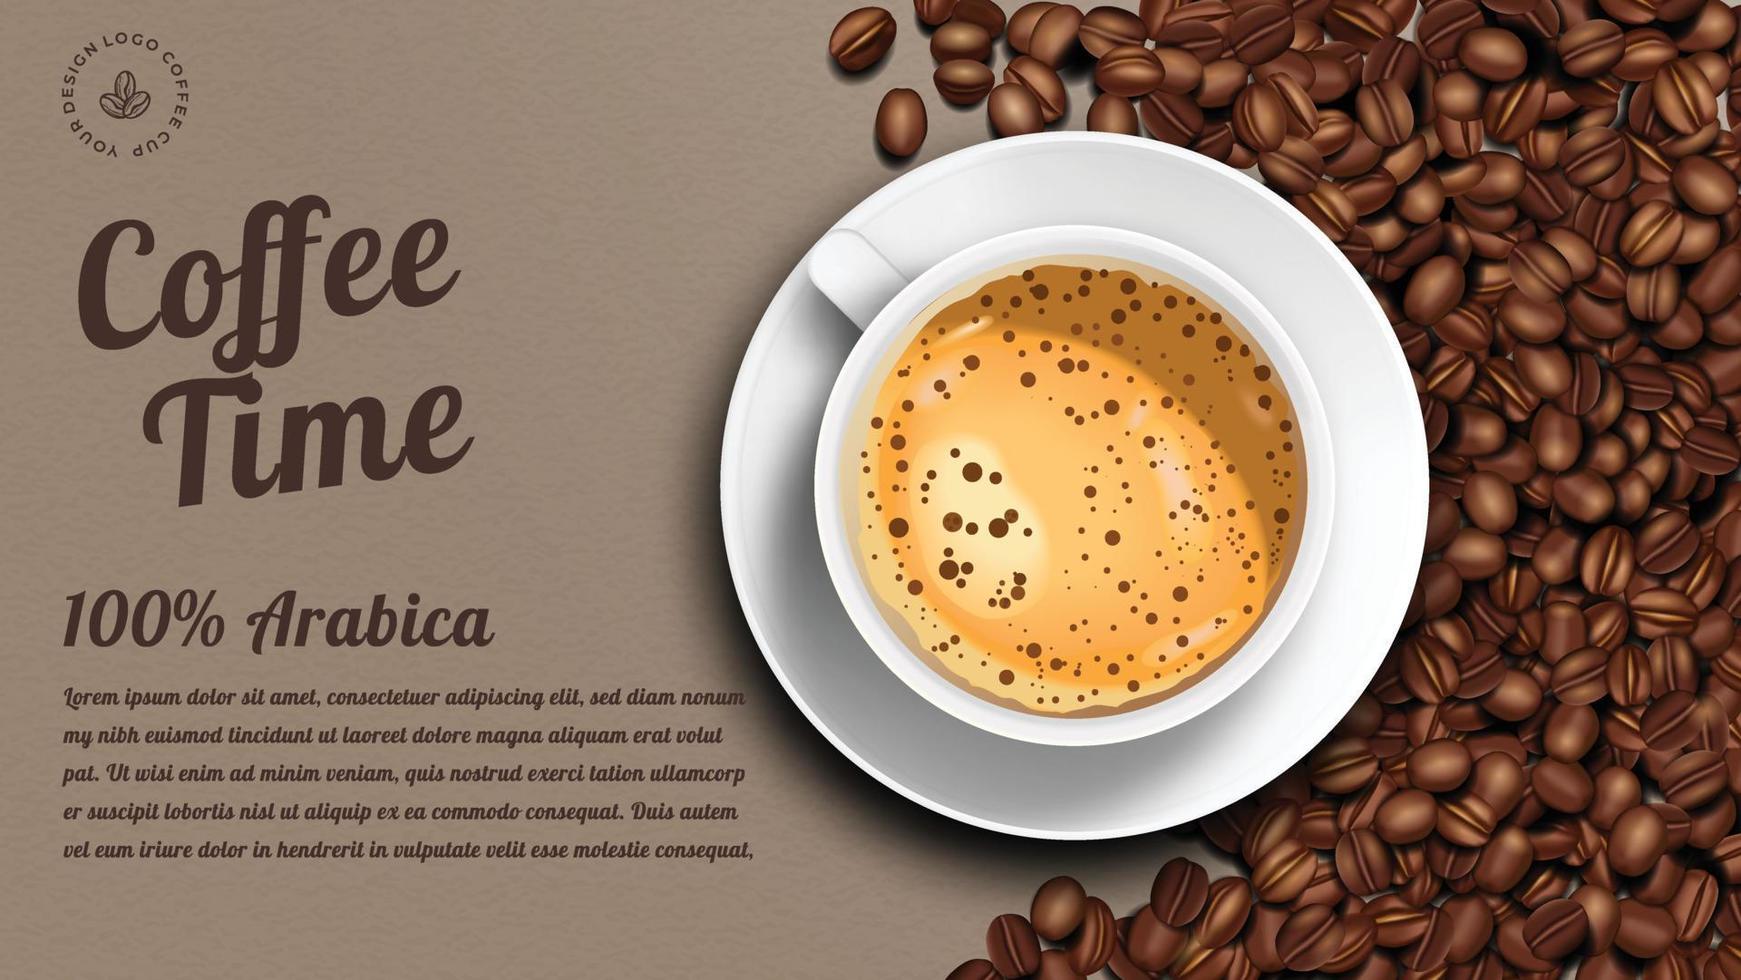 coffee banner ads retro brown style with latte and coffee beans 3d realistic simple. vector